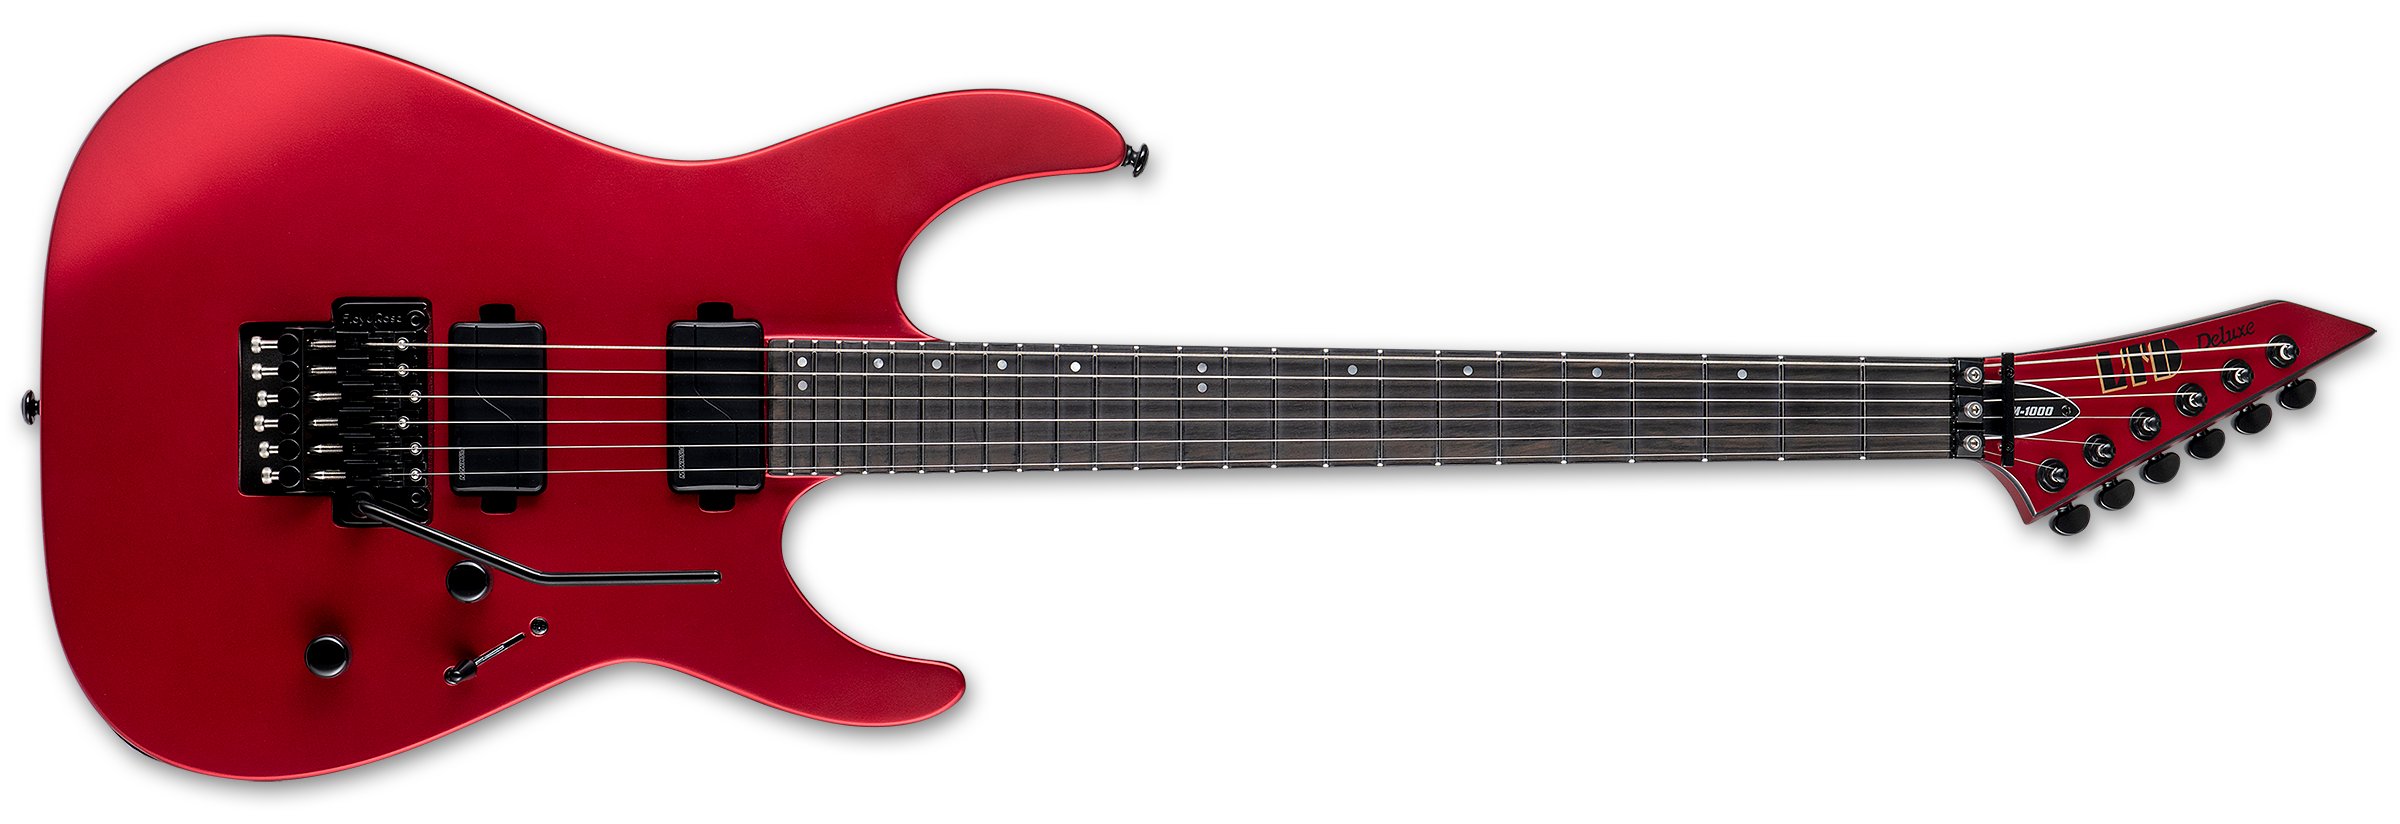 LTD M-1000 Electric Guitar, Candy Apple Red Satin LM1000CARS